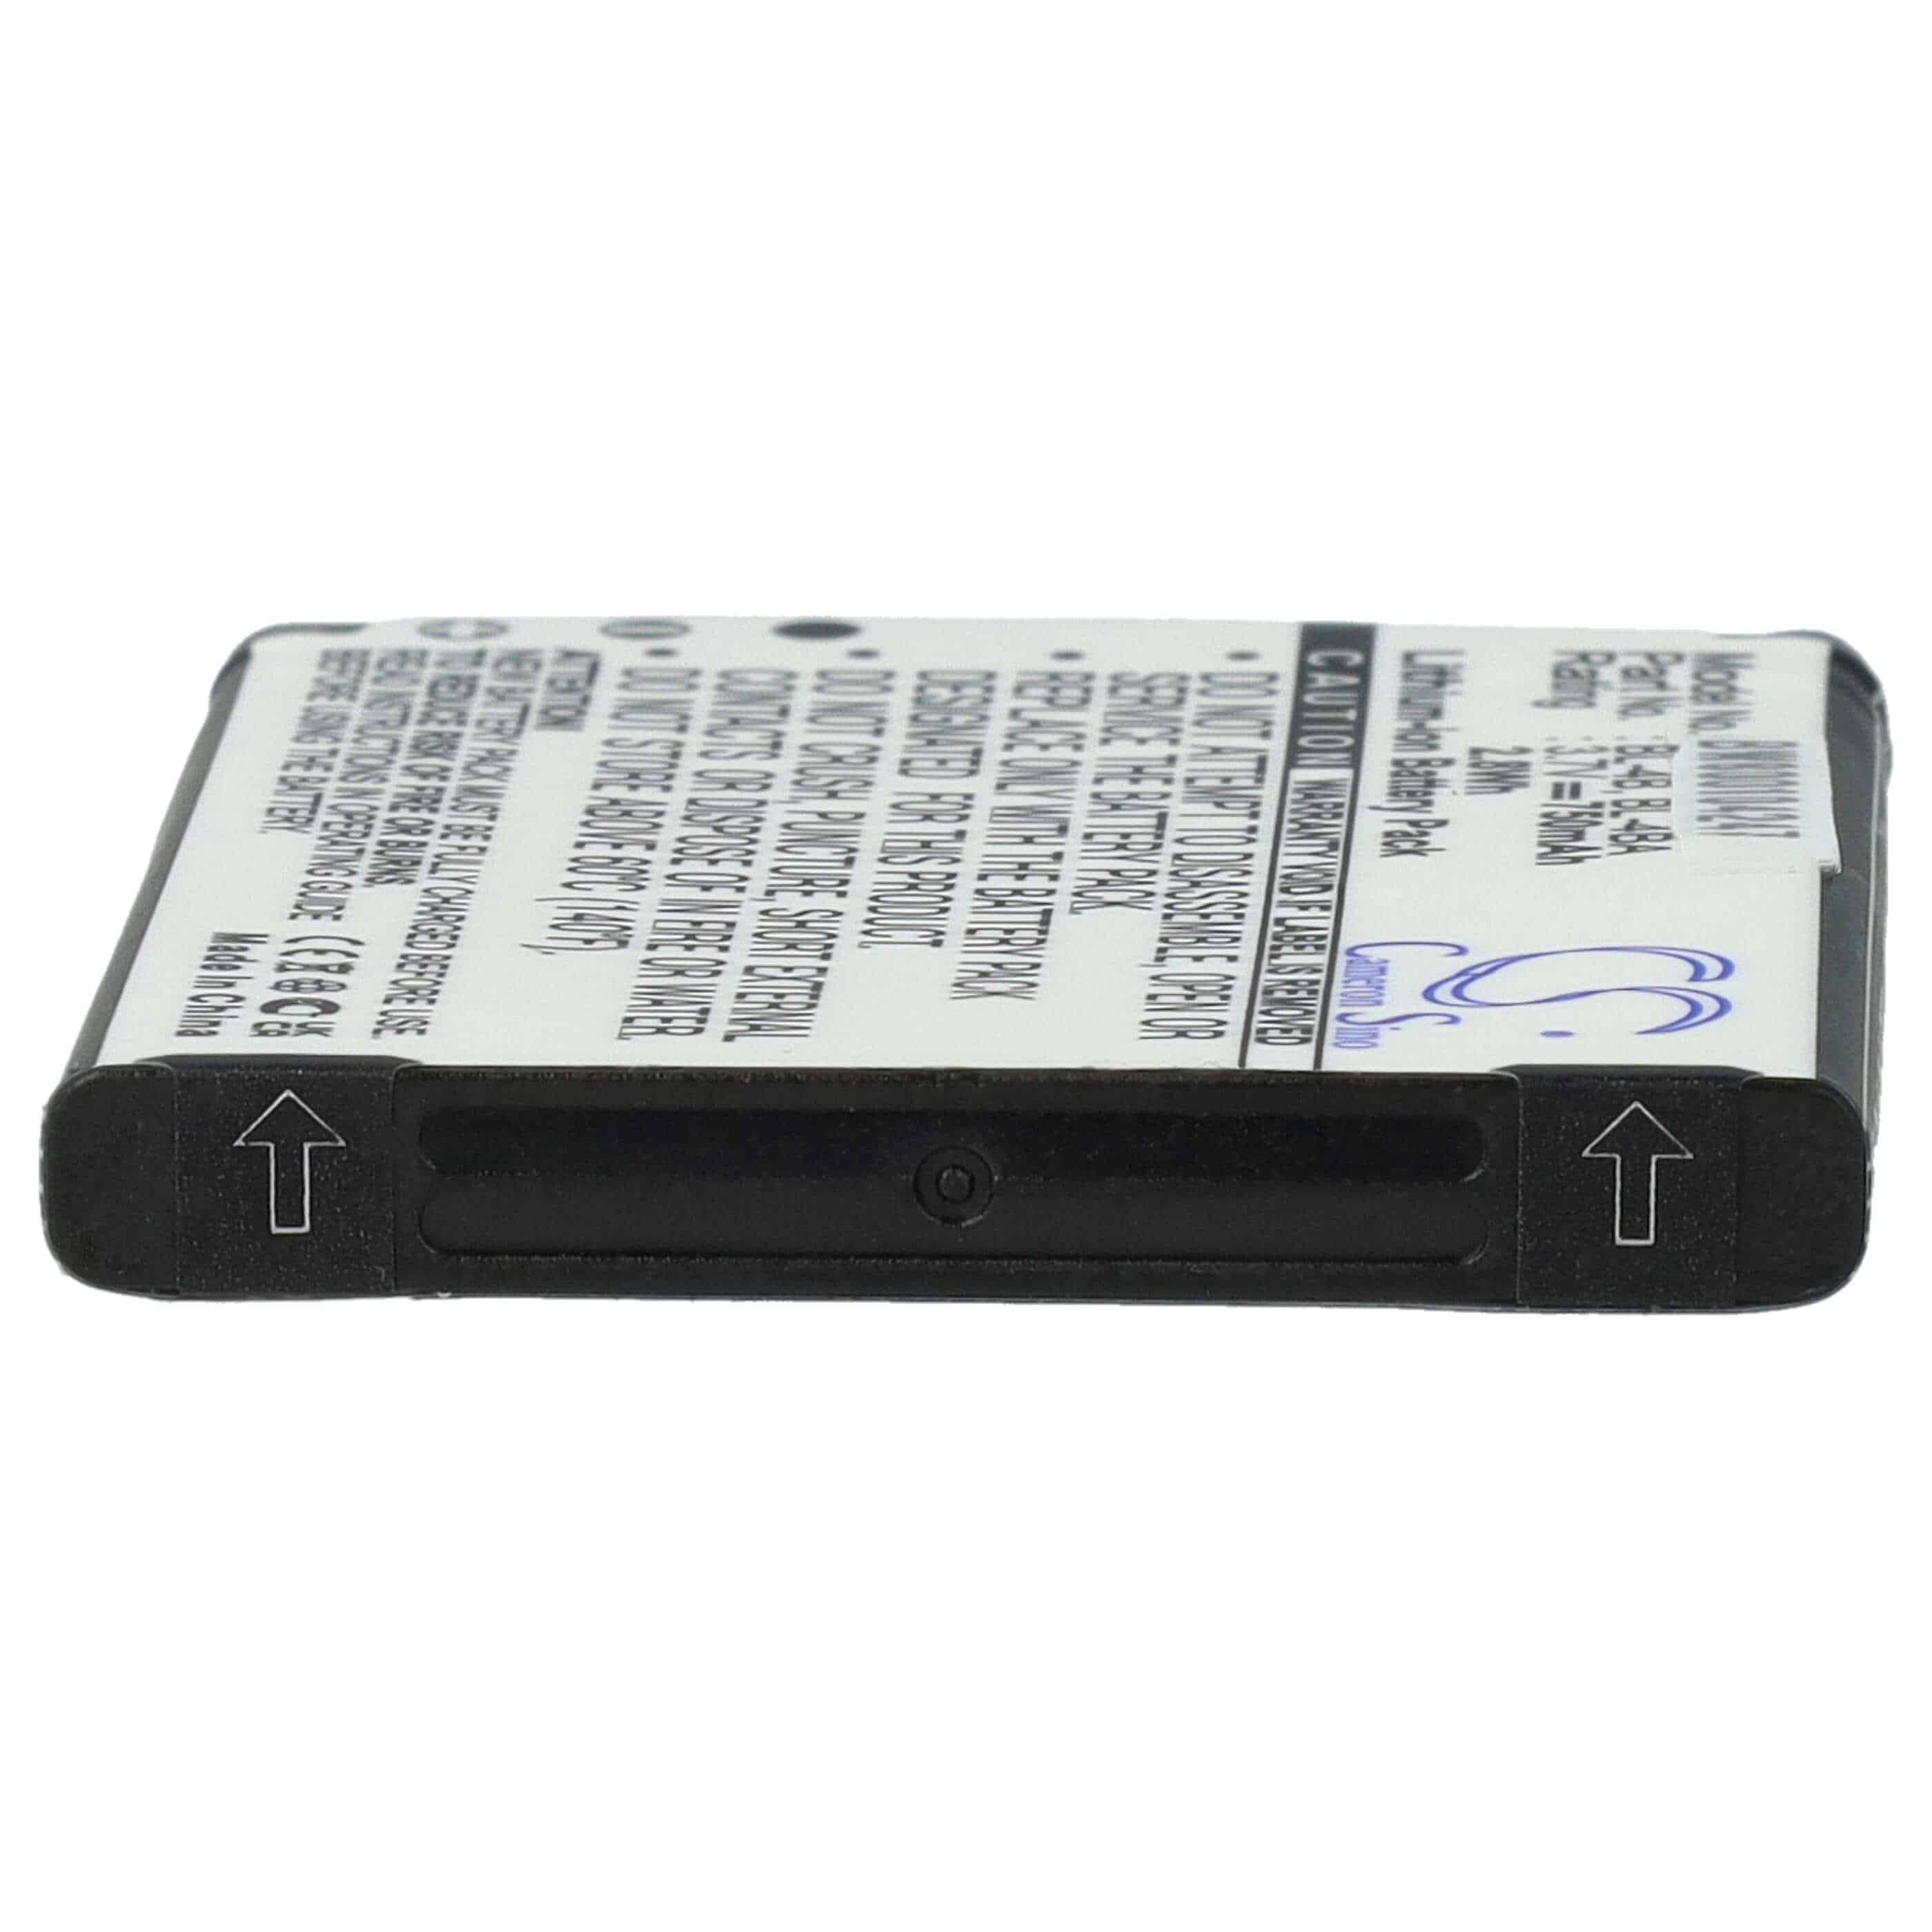 Mobile Phone Battery Replacement for Elson BTY26176MOBISTEL/STD, BTY26176 - 800mAh 3.7V Li-Ion